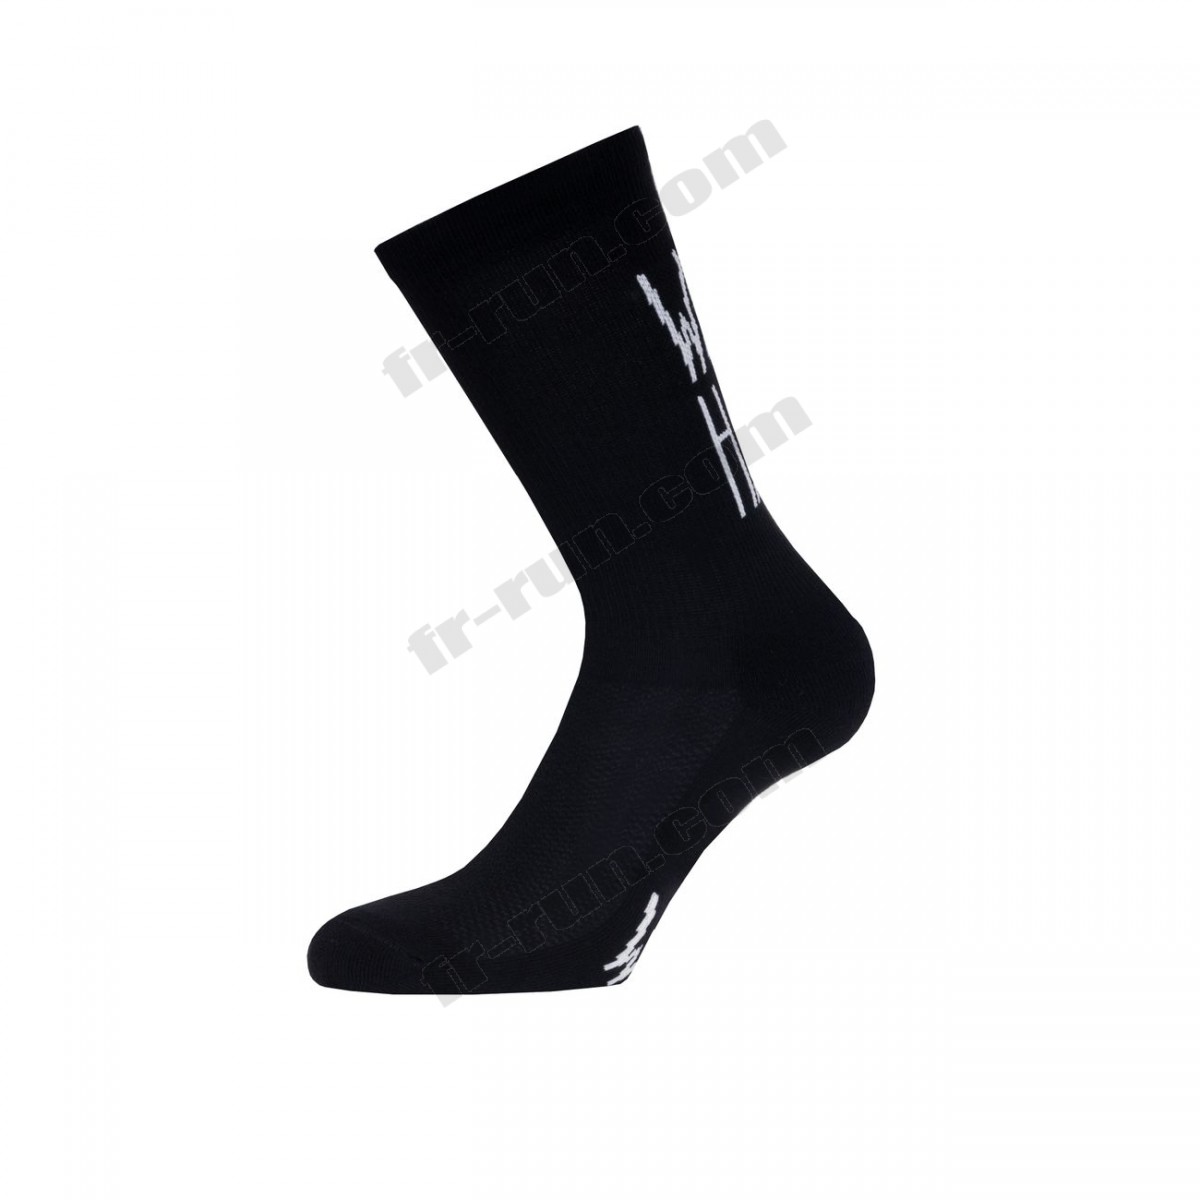 Pacific And Co/running adulte PACIFIC and CO WORK HARD Unisex Performance Socks ◇◇◇ Pas Cher Du Tout - -1